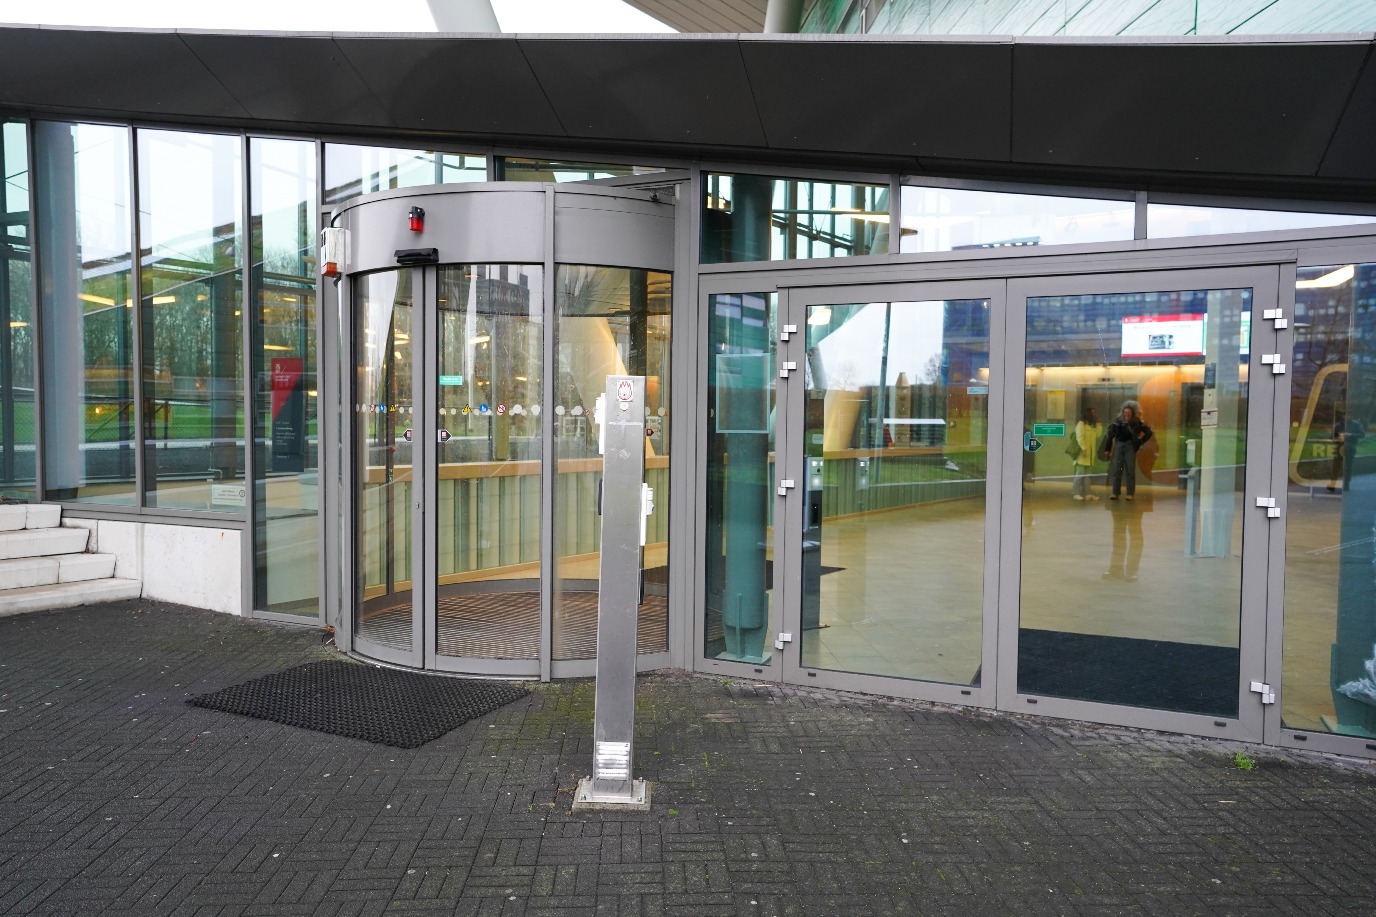 Main entrance of the building, automatic sliding doors  